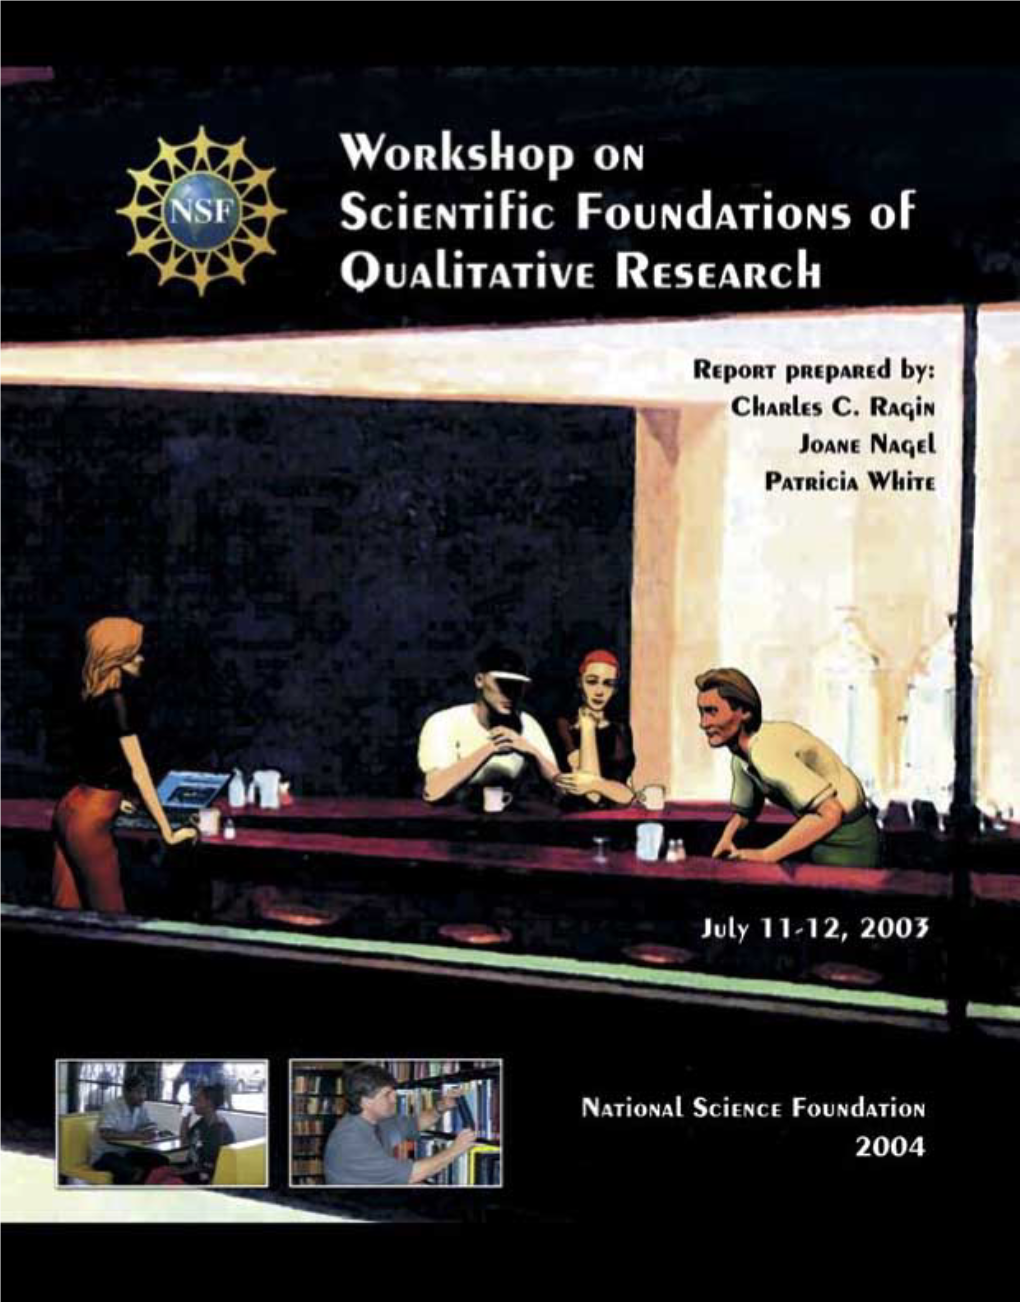 NSF 04-219, Workshop on Scientific Foundations of Qualitative Research